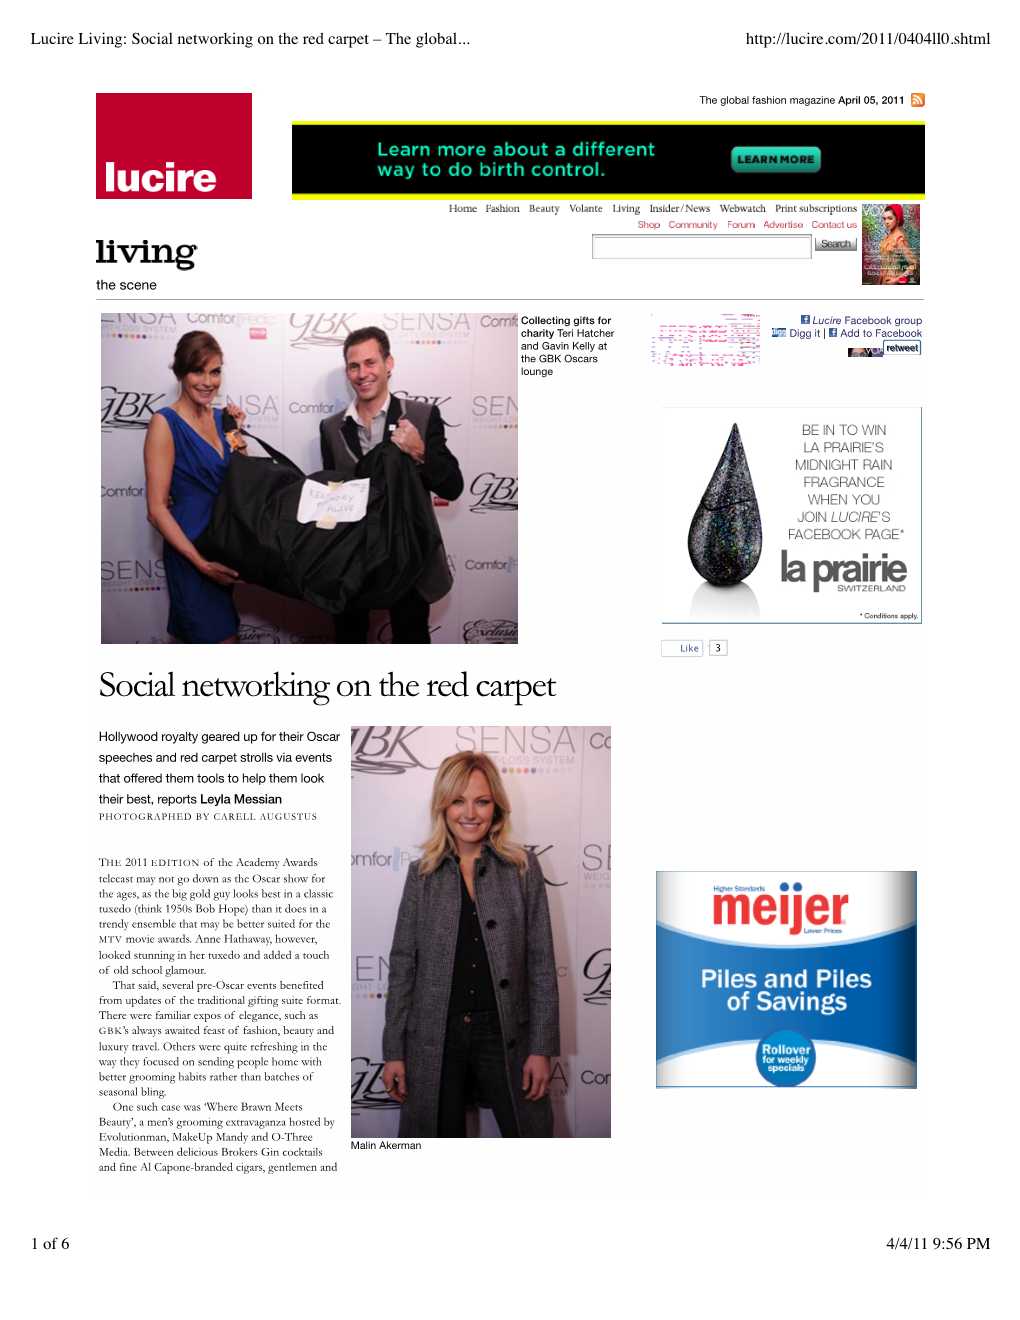 Social Networking on the Red Carpet – the Global Fashion Magazine